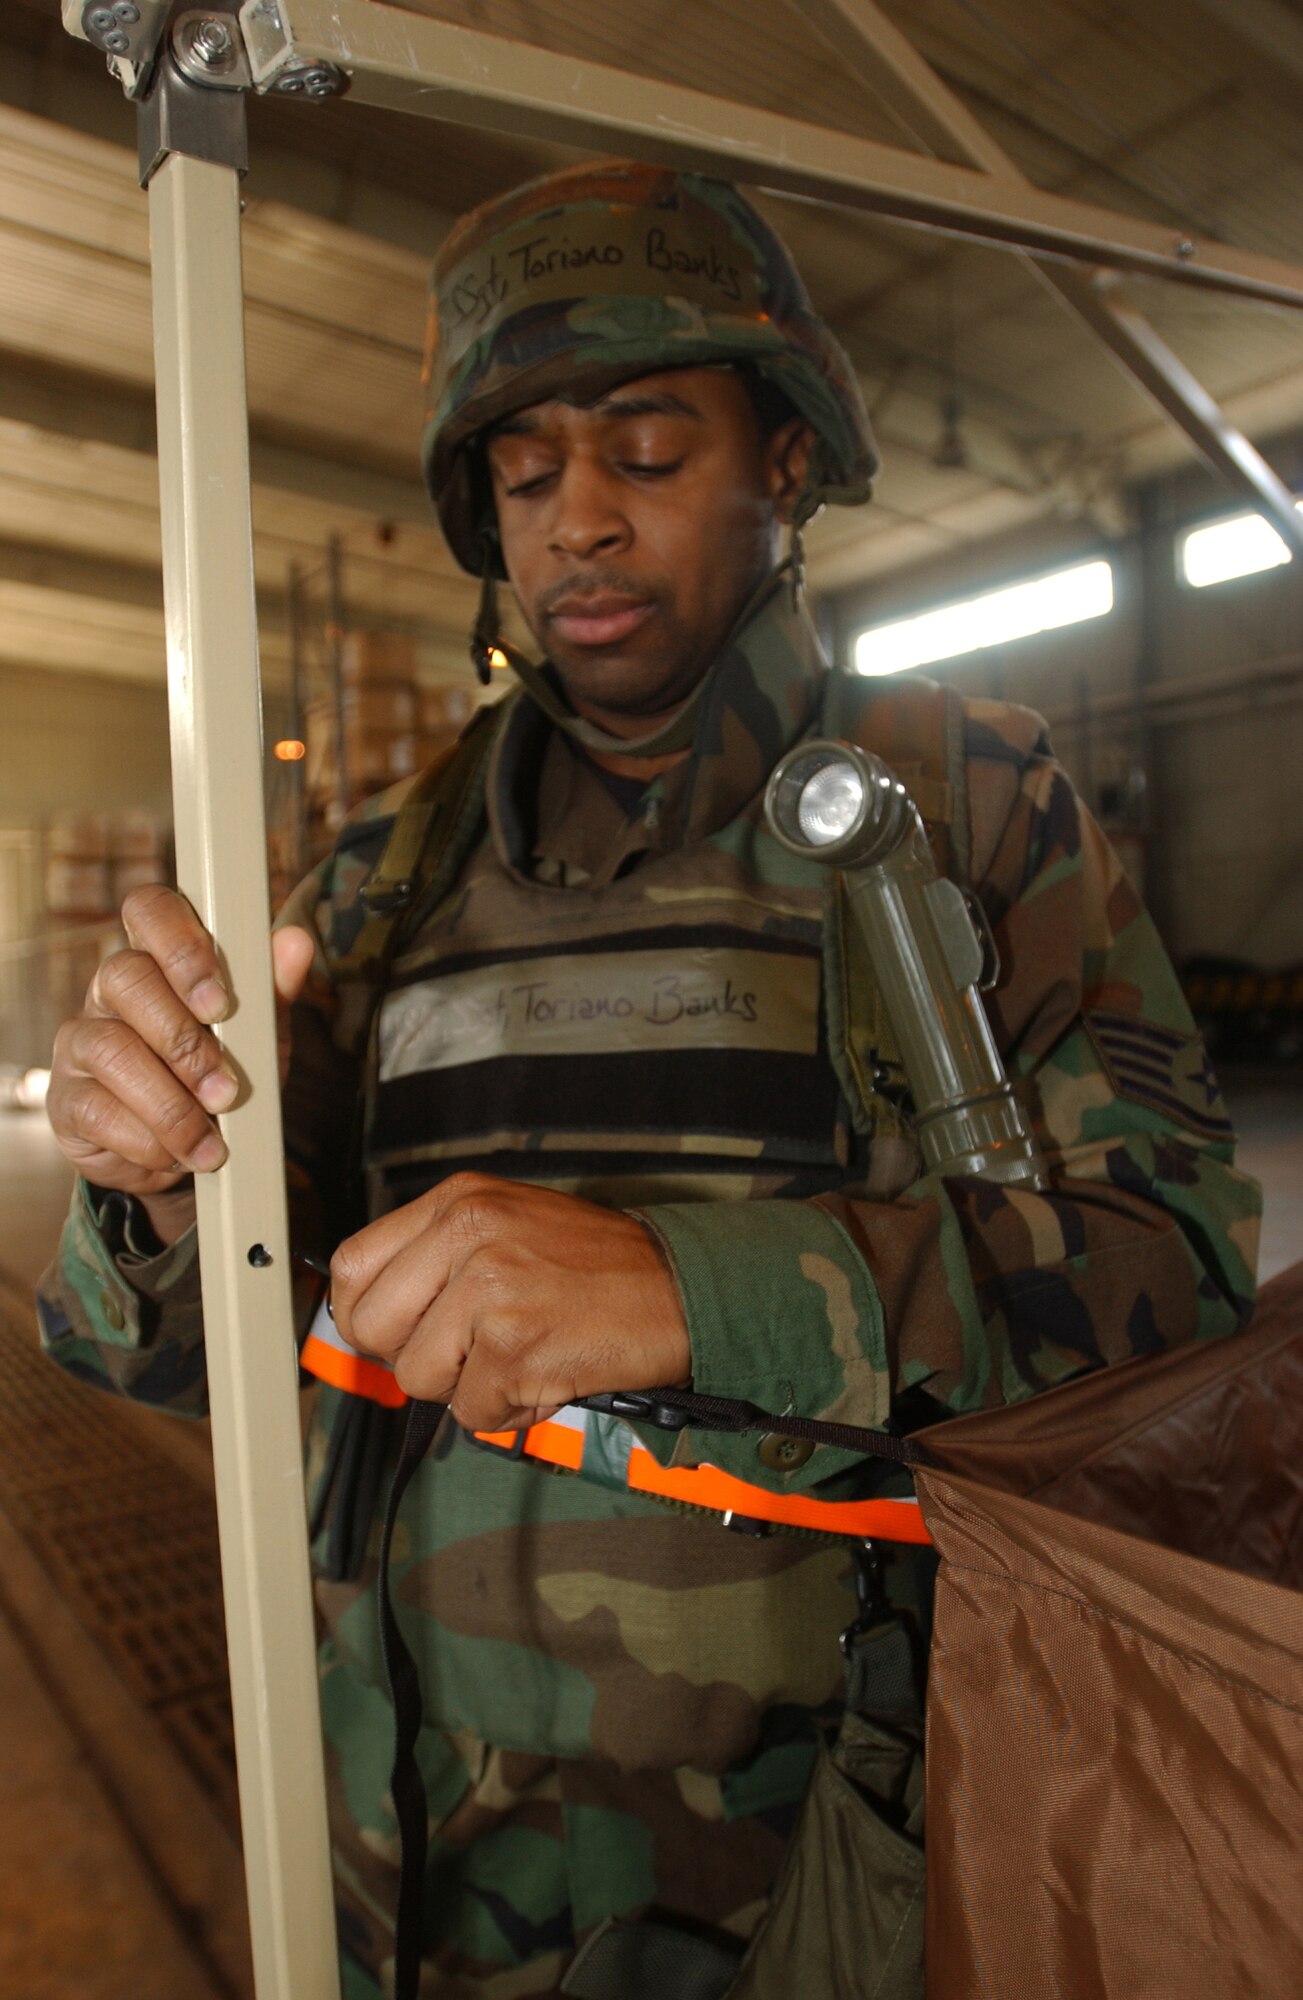 KUNSAN AIR BASE, Republic of Korea  March 22, 2007 -- Staff Sgt. Toriano Banks attaches a hook for the gas mask cleaning portion of a chemical contamination area March 22. The CCA was built to decontaminate Airmen following contamination from a mock chemical attack. Sgt. Banks is a member of the 8th Comptroller Squadron, the unit responsible for building and manning a CCA day or night. (Air Force photo/Senior Airman Darnell Cannady)